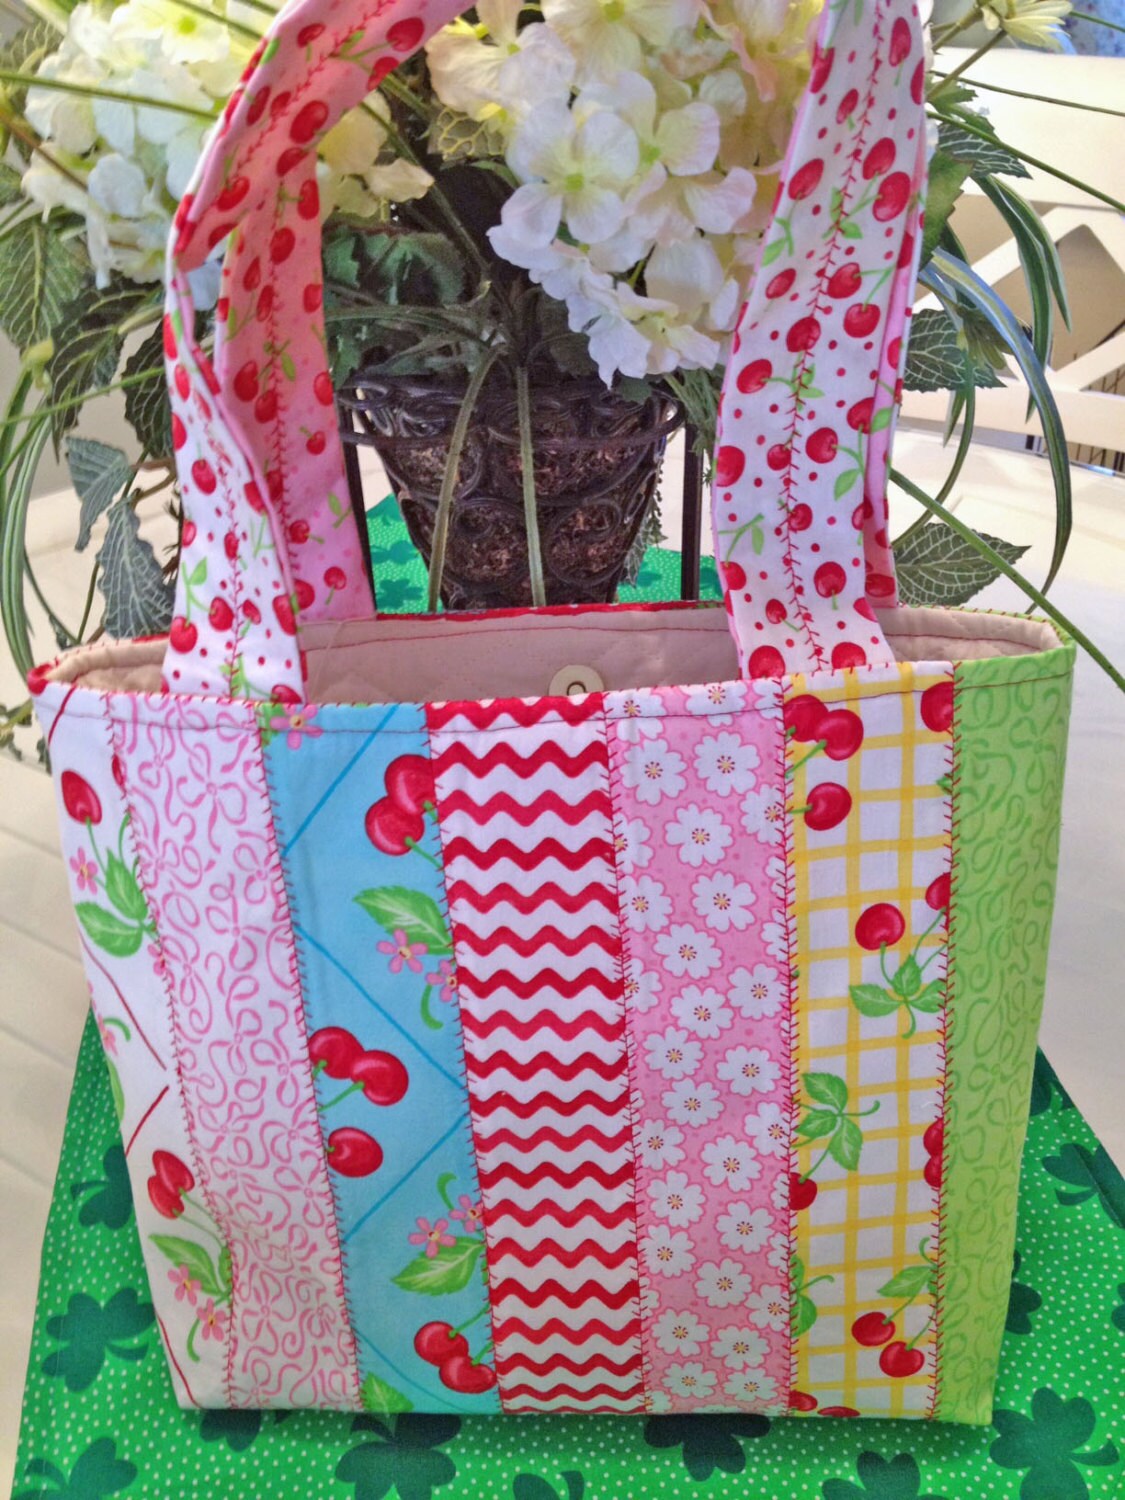 Jellyroll Tote Bag 11x13 with Two Inside Pockets